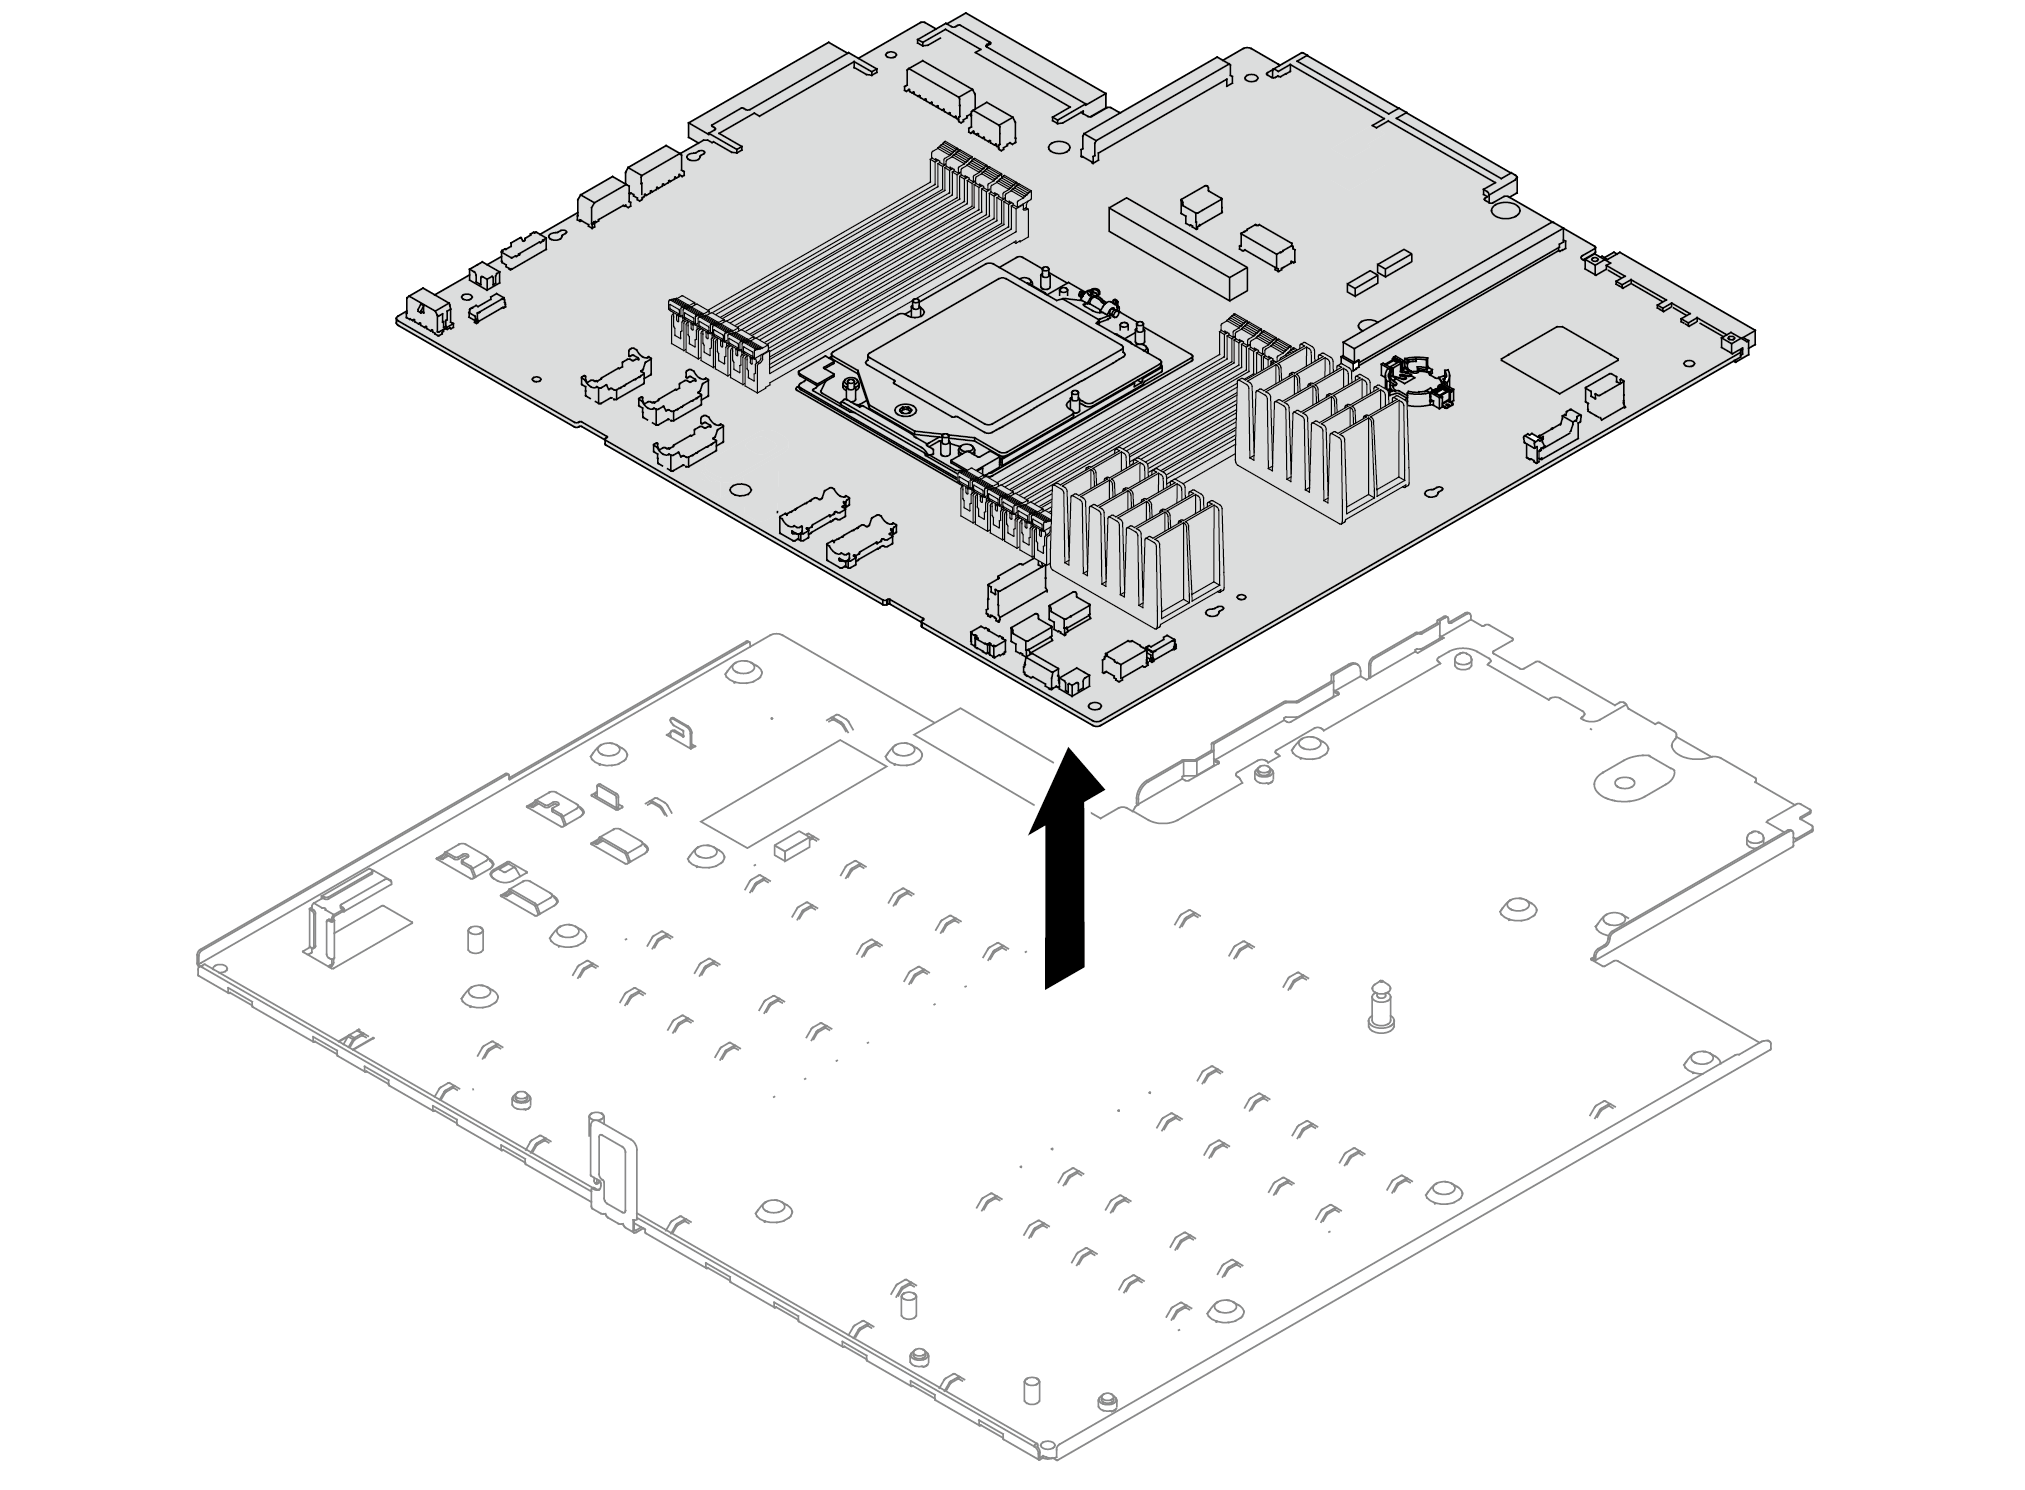 Separating the processor board from the system board tray